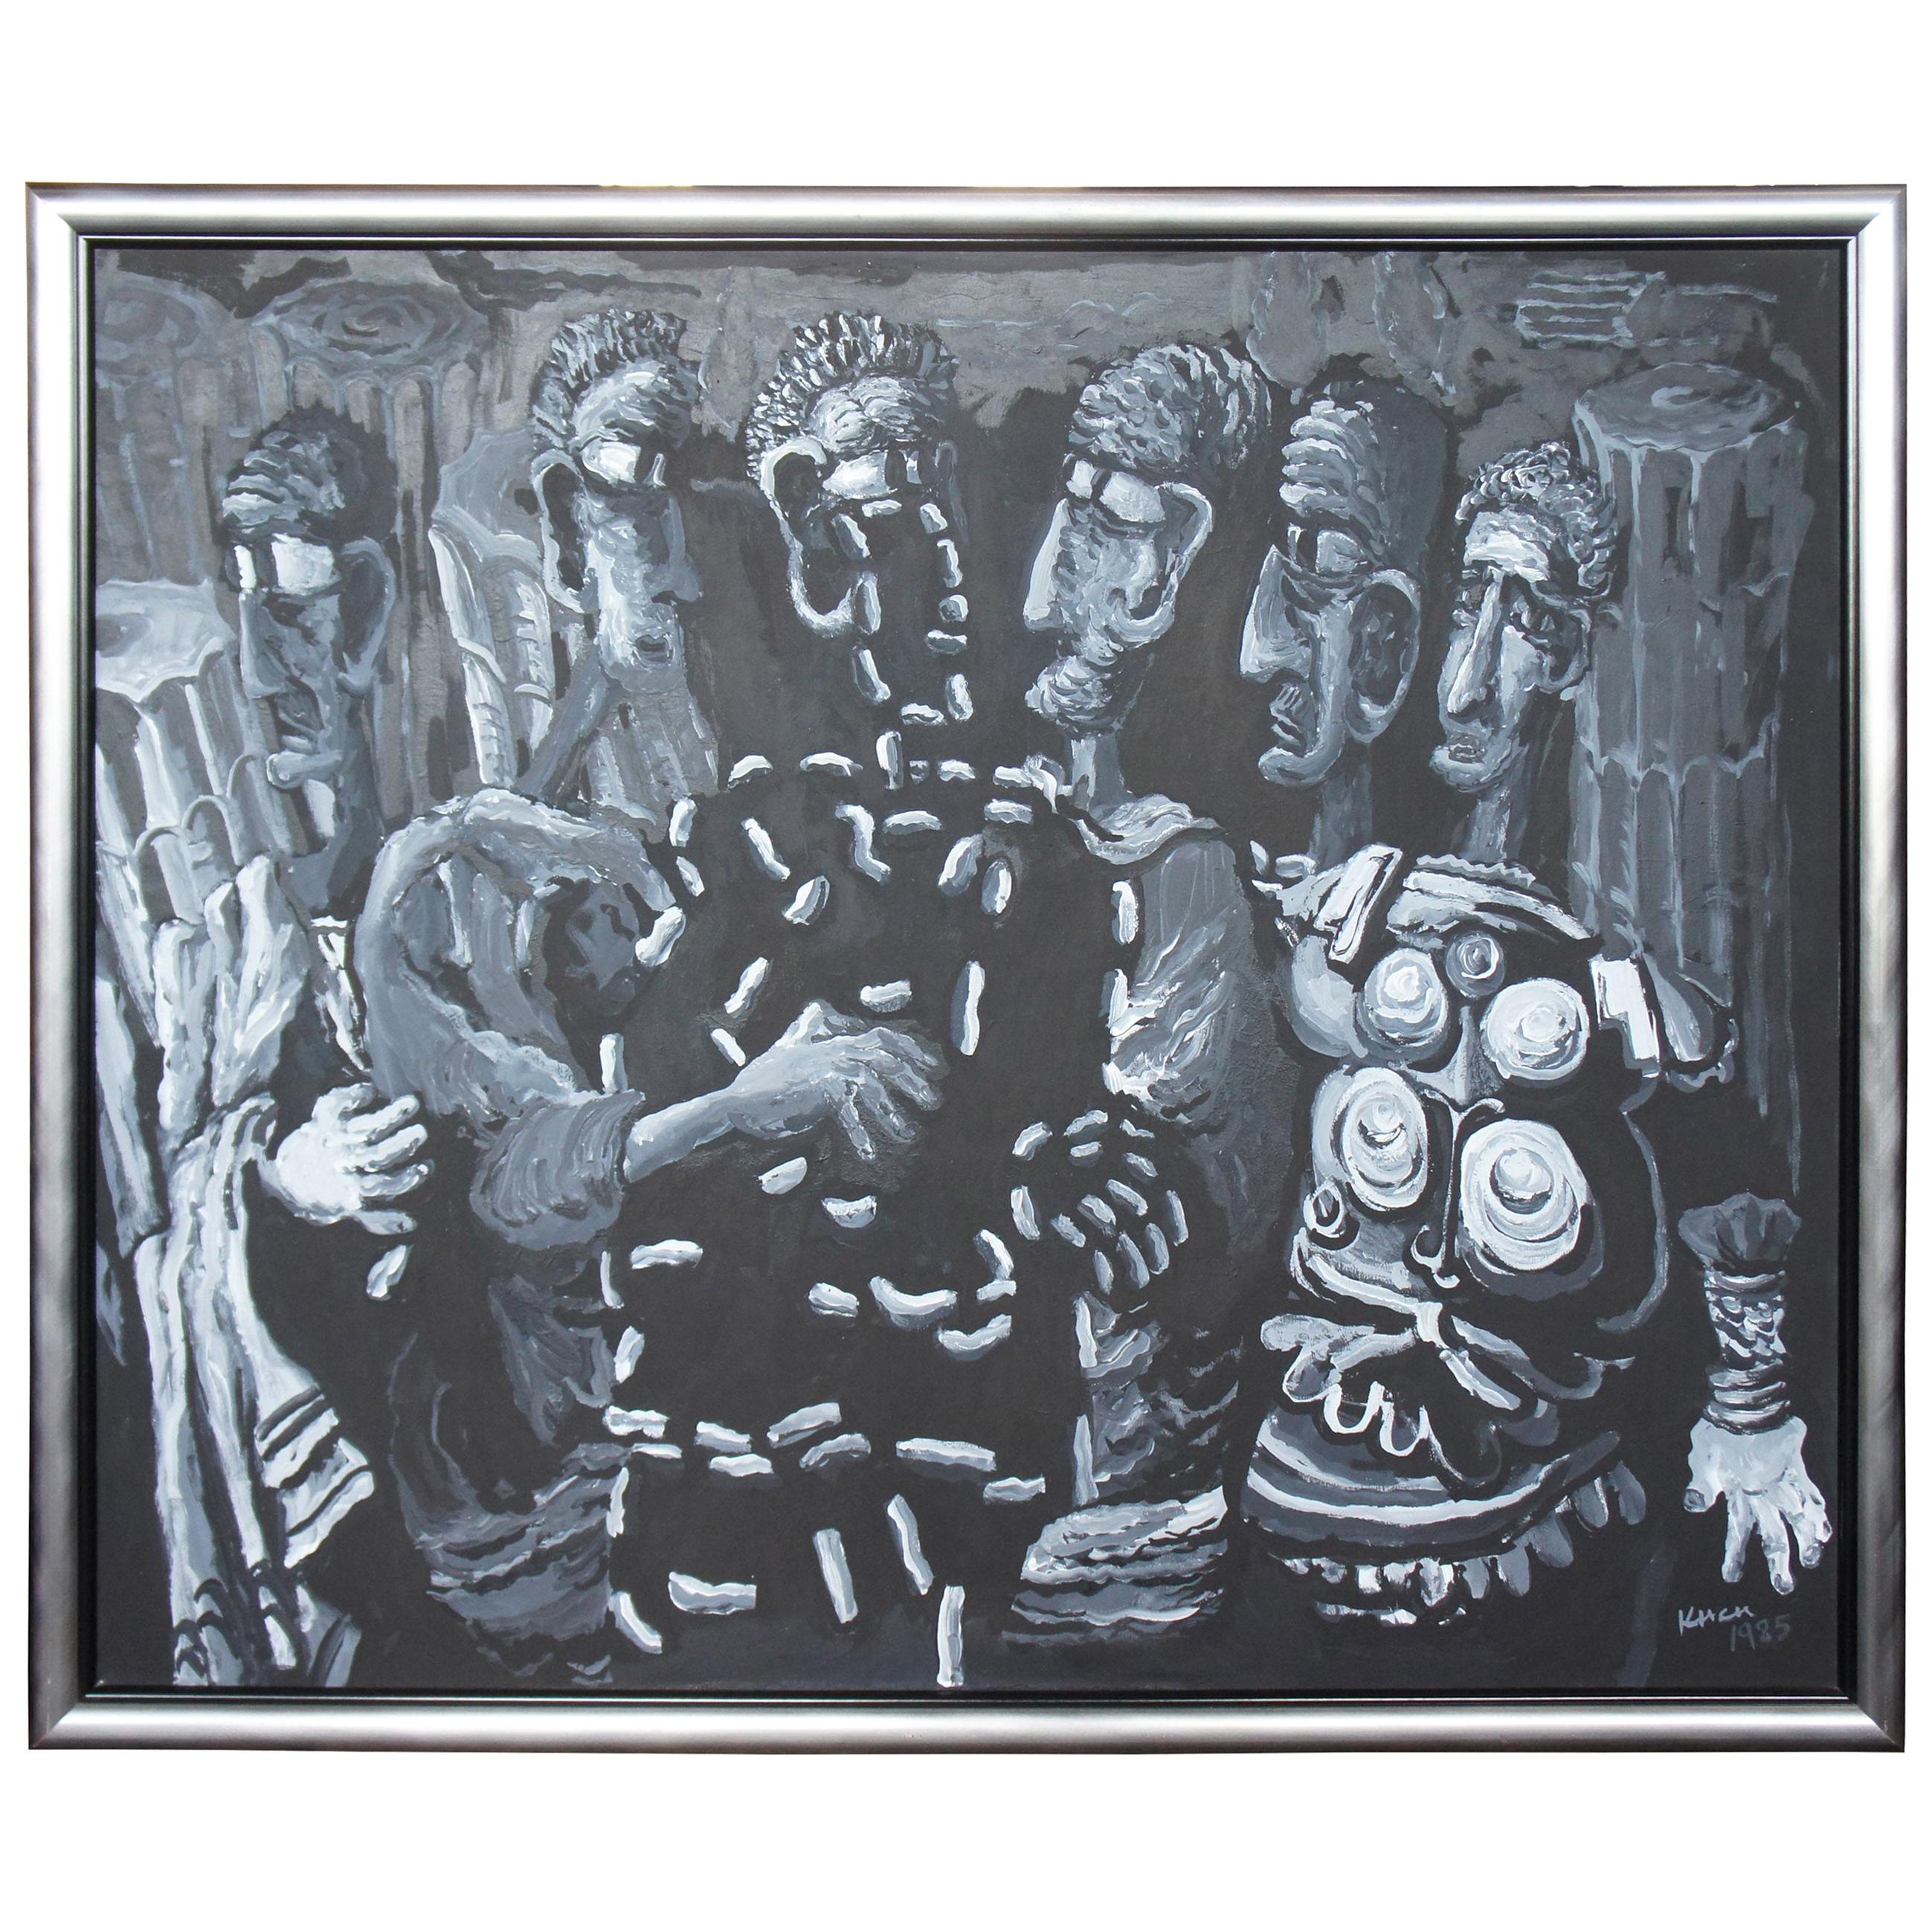 The Senate by Tom Keesee 1985 Black and White Expressionist Acrylic Painting